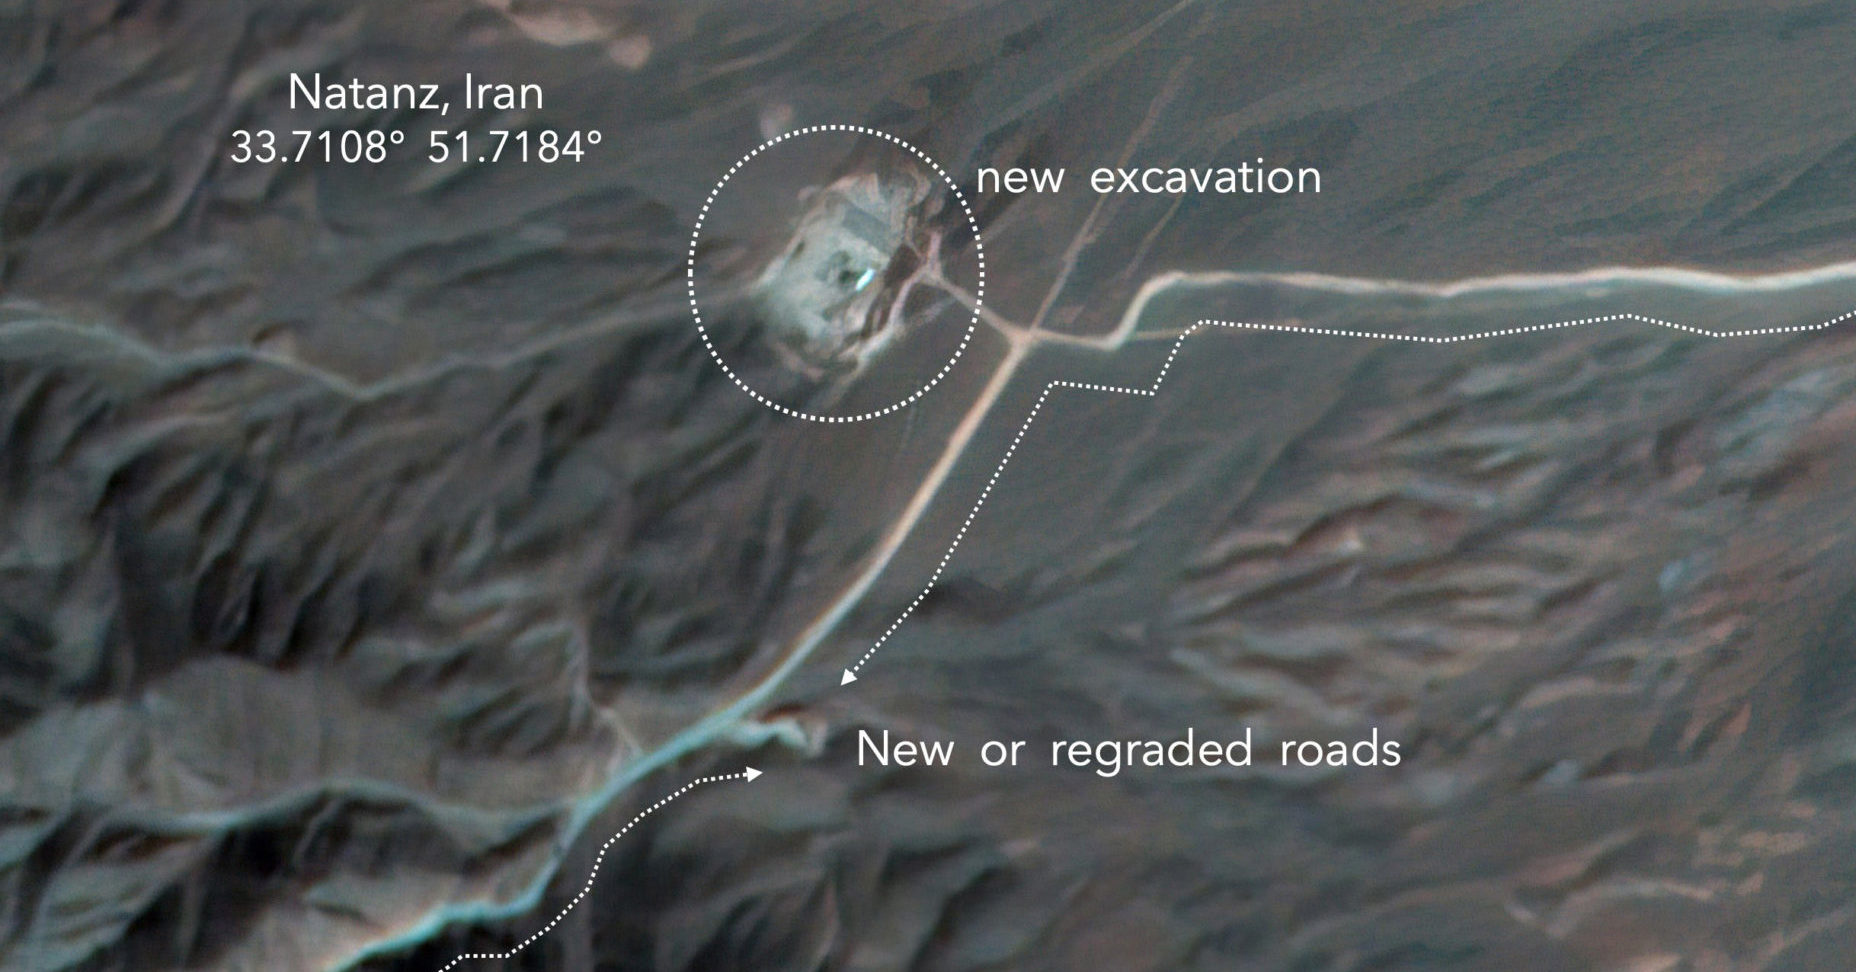 A satellite image Monday from Planet Labs Inc., annotated by experts at the James Martin Center for Nonproliferation Studies at Middlebury Institute of International Studies, shows construction at Iran's Natanz uranium-enrichment facility that experts believe may be a new, underground centrifuge assembly plant.